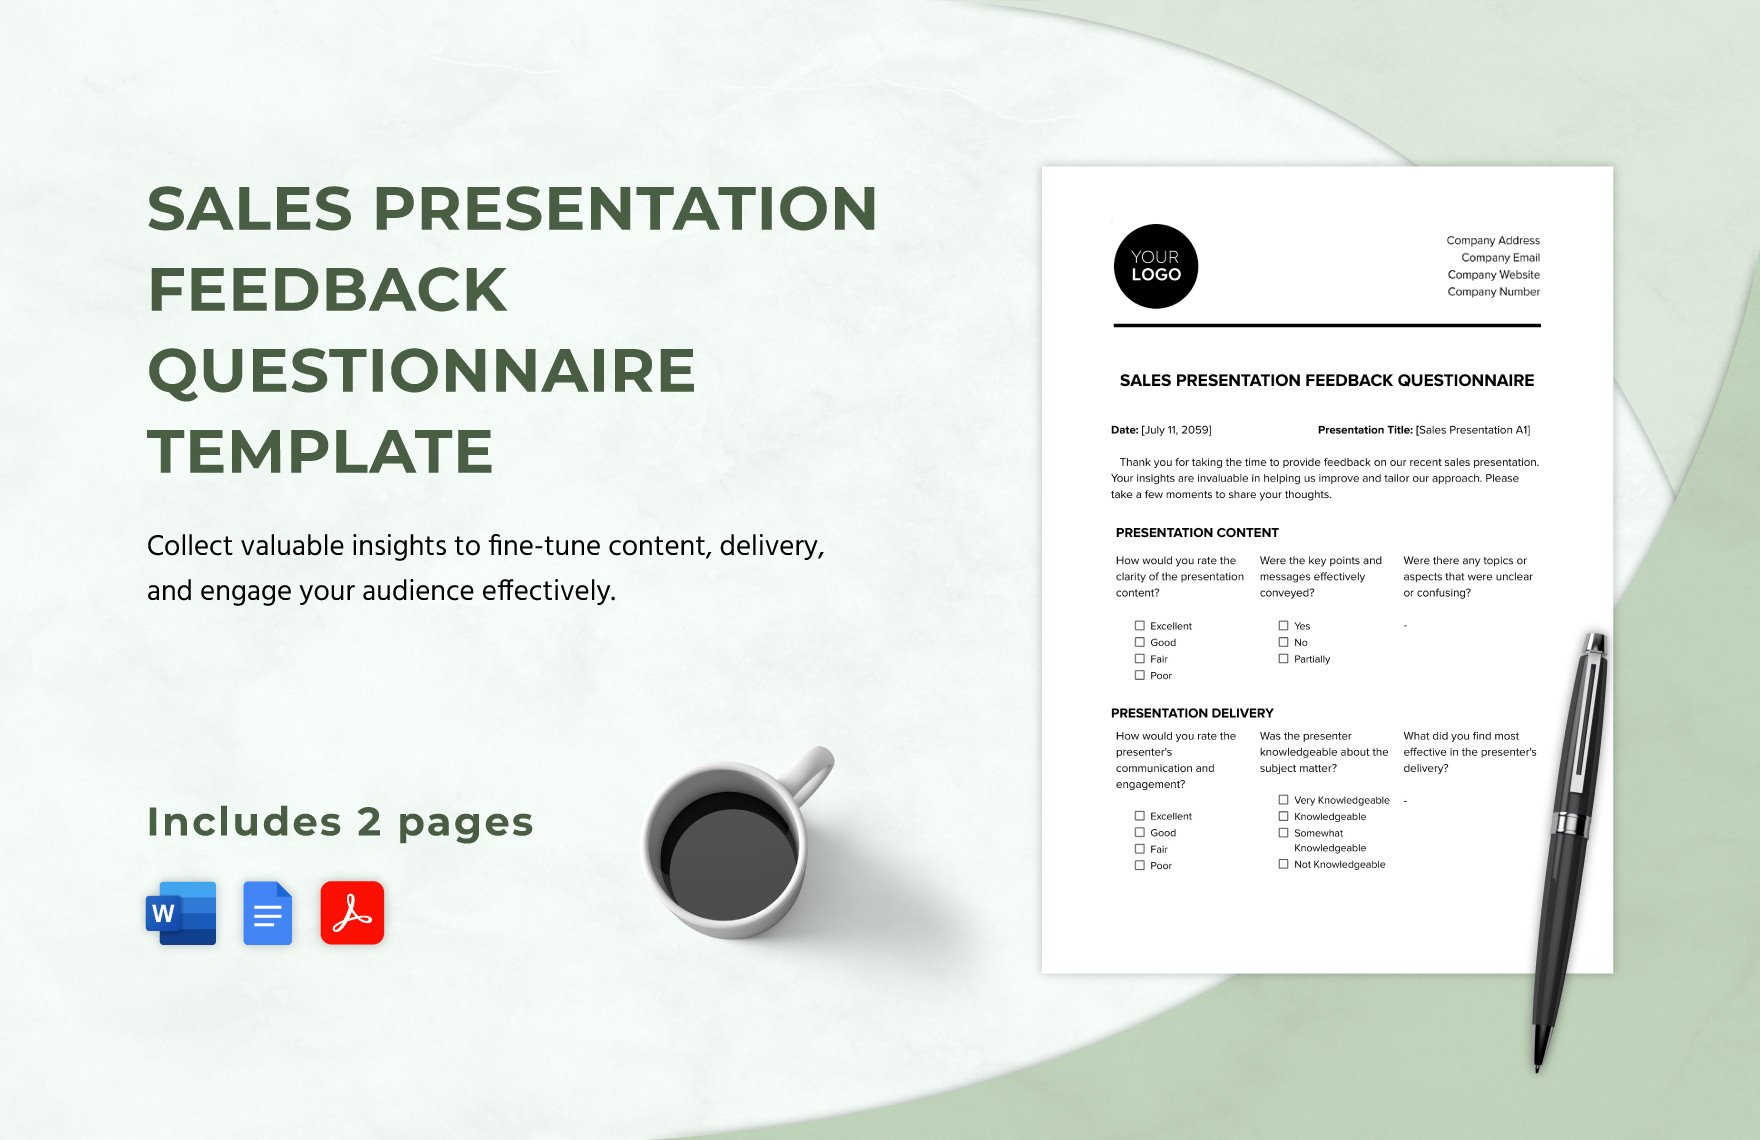 Sales Presentation Feedback Questionnaire Template in Word, Google Docs, PDF